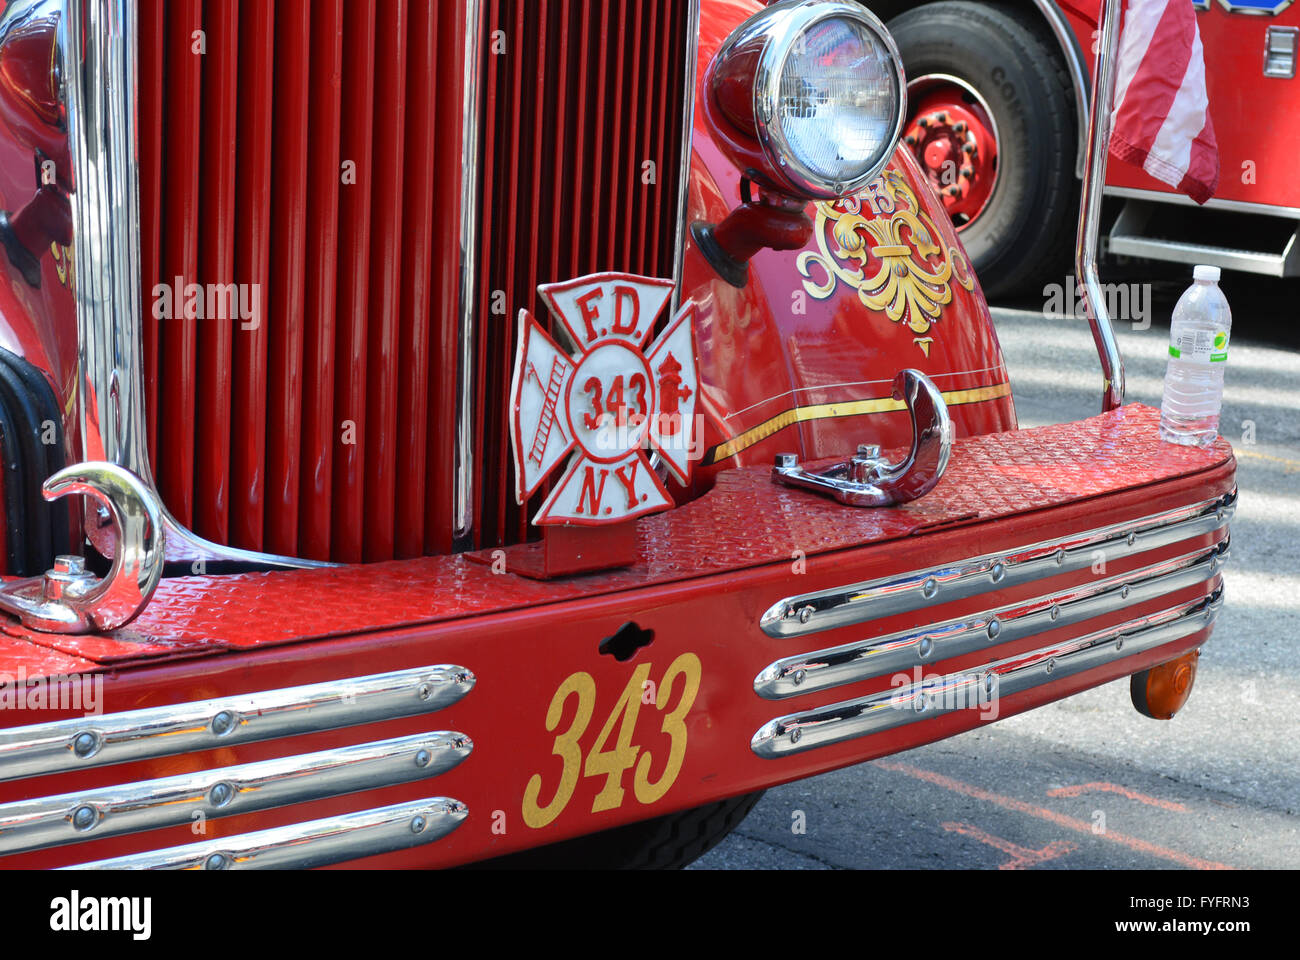 Old Fashioned FDNY truck on display in Manhattan. Stock Photo